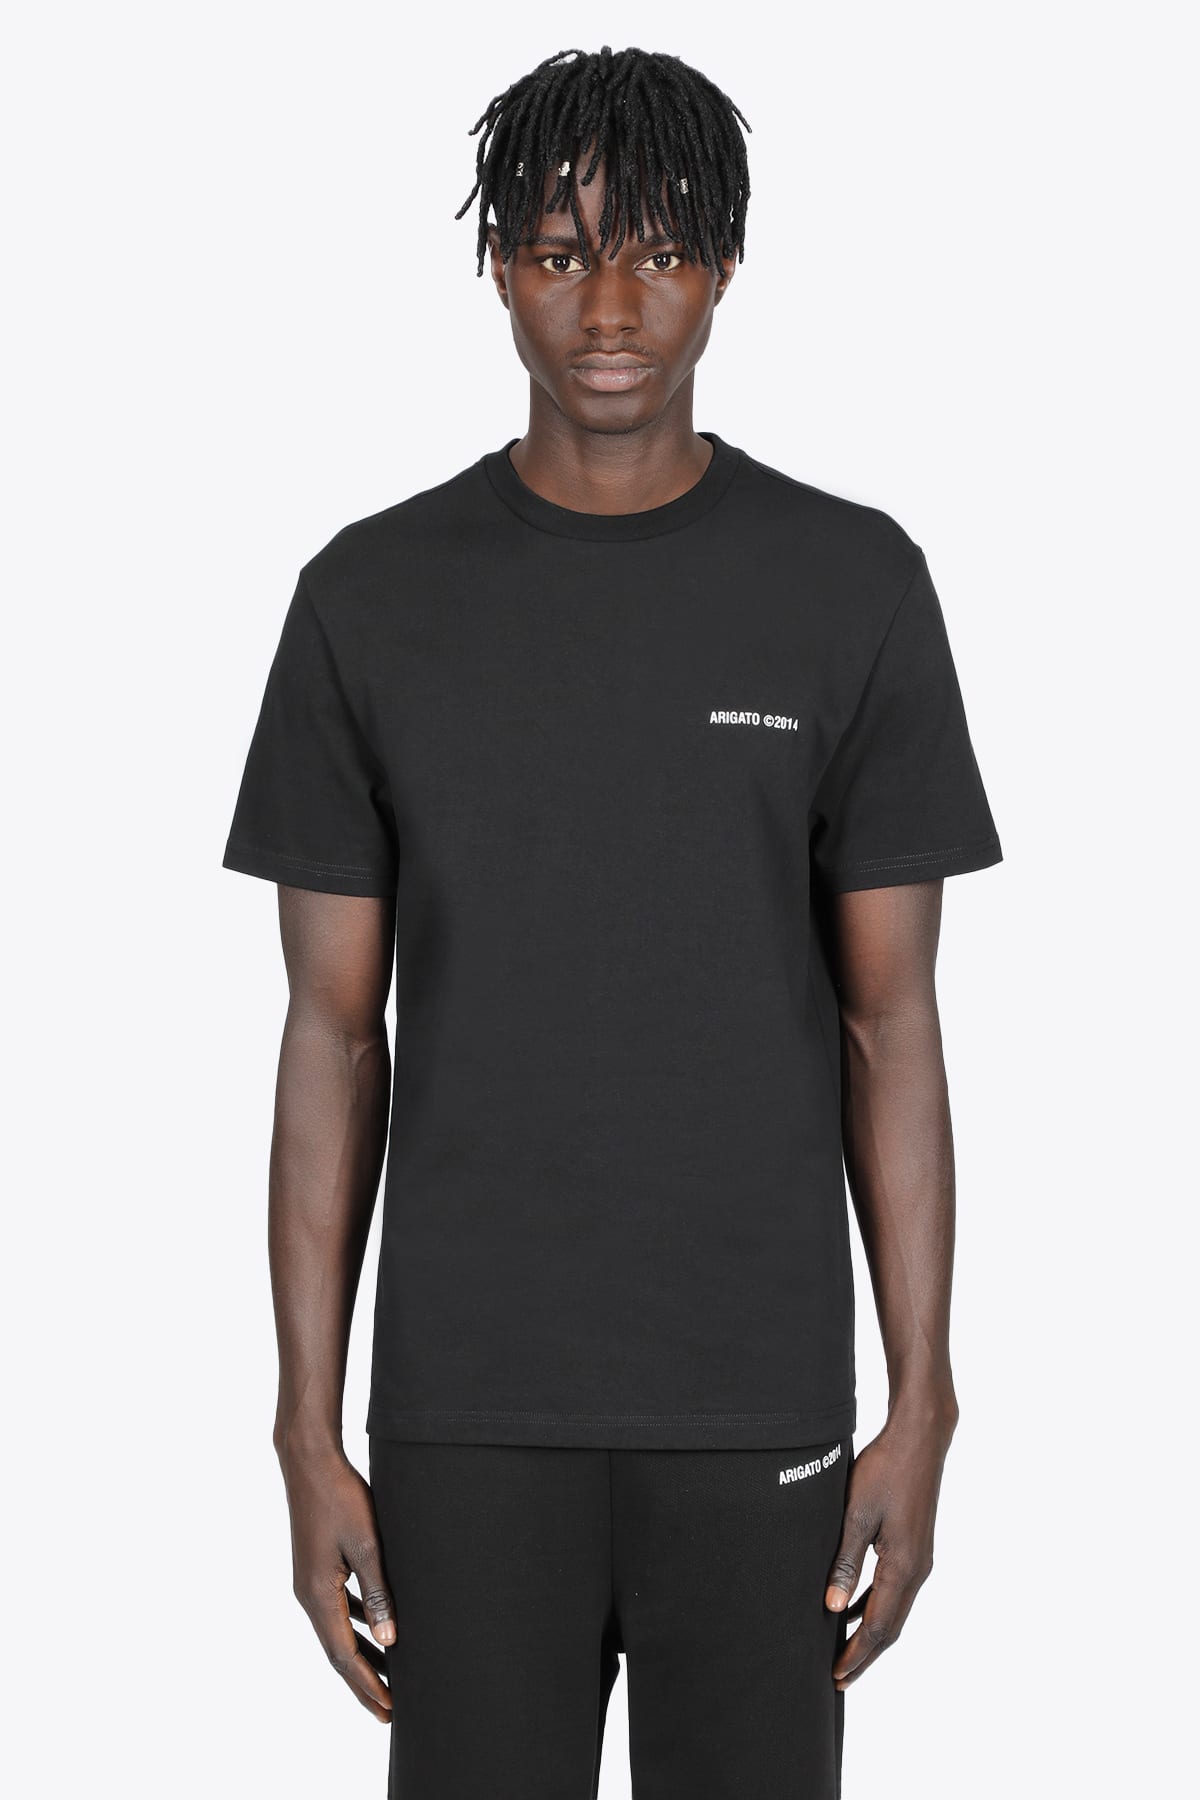 Axel Arigato London T-shirt Black cotton t-shirt with front and back logo print